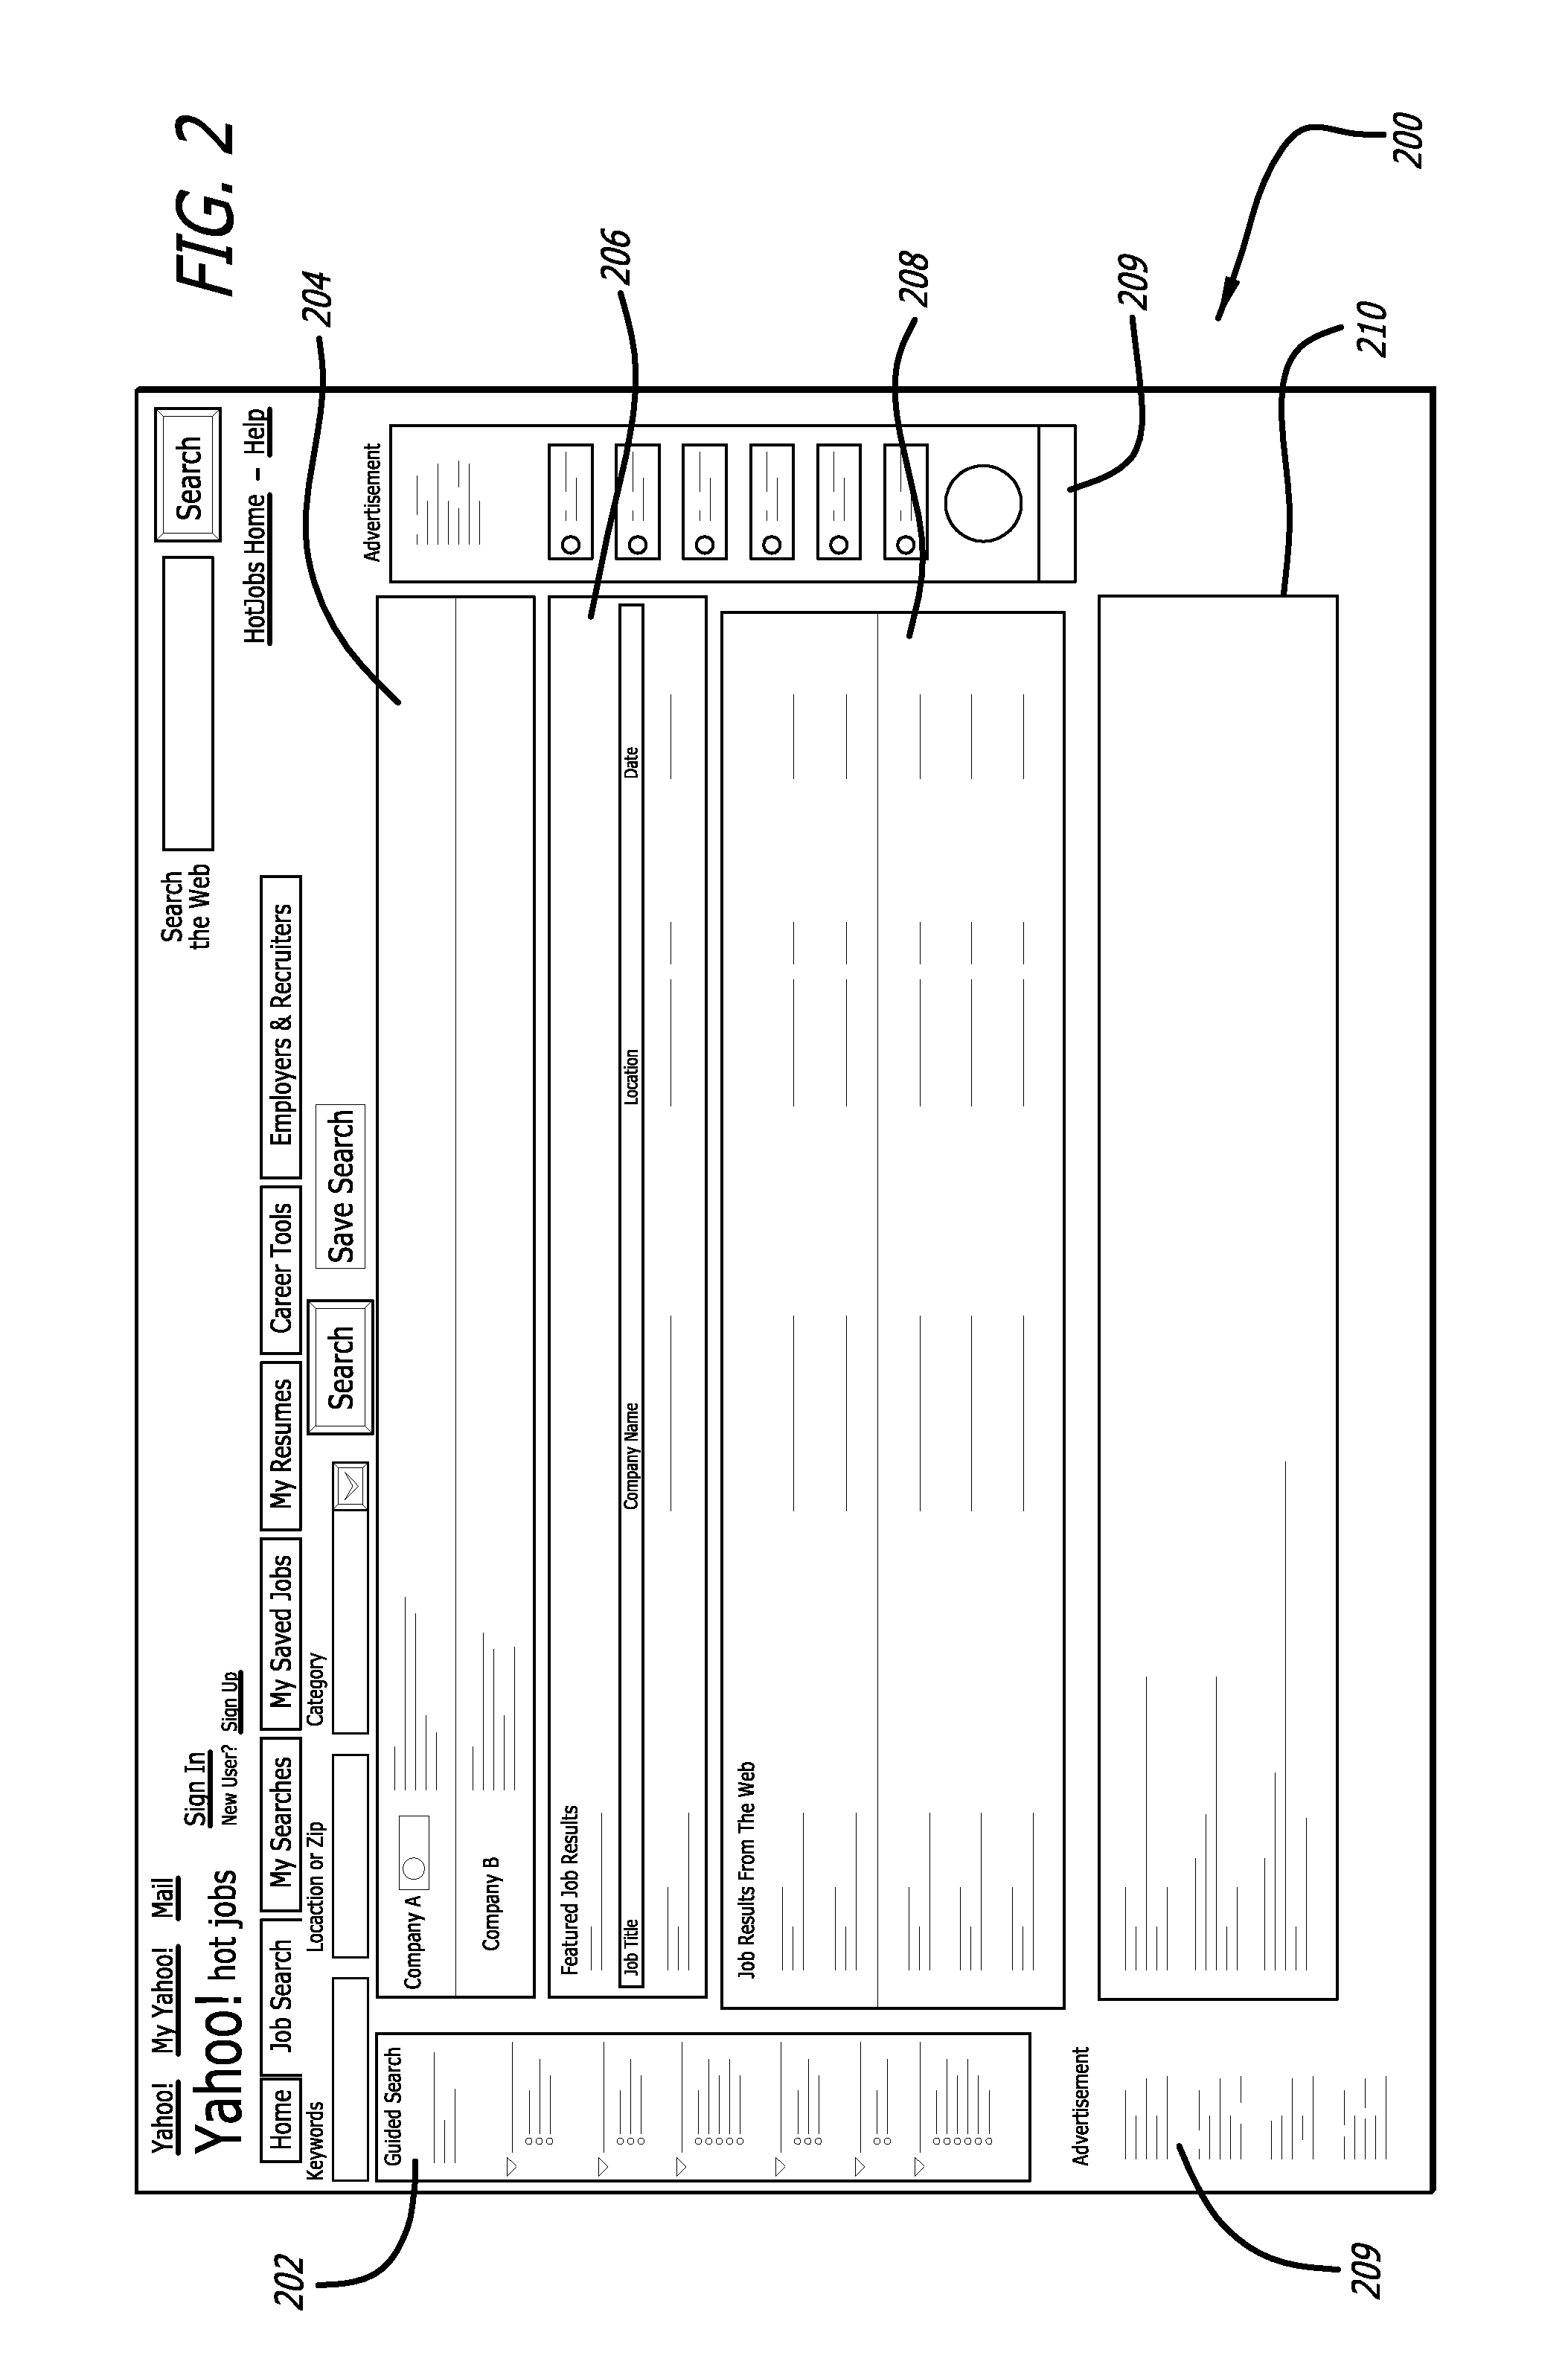 System and method for improved job seeking